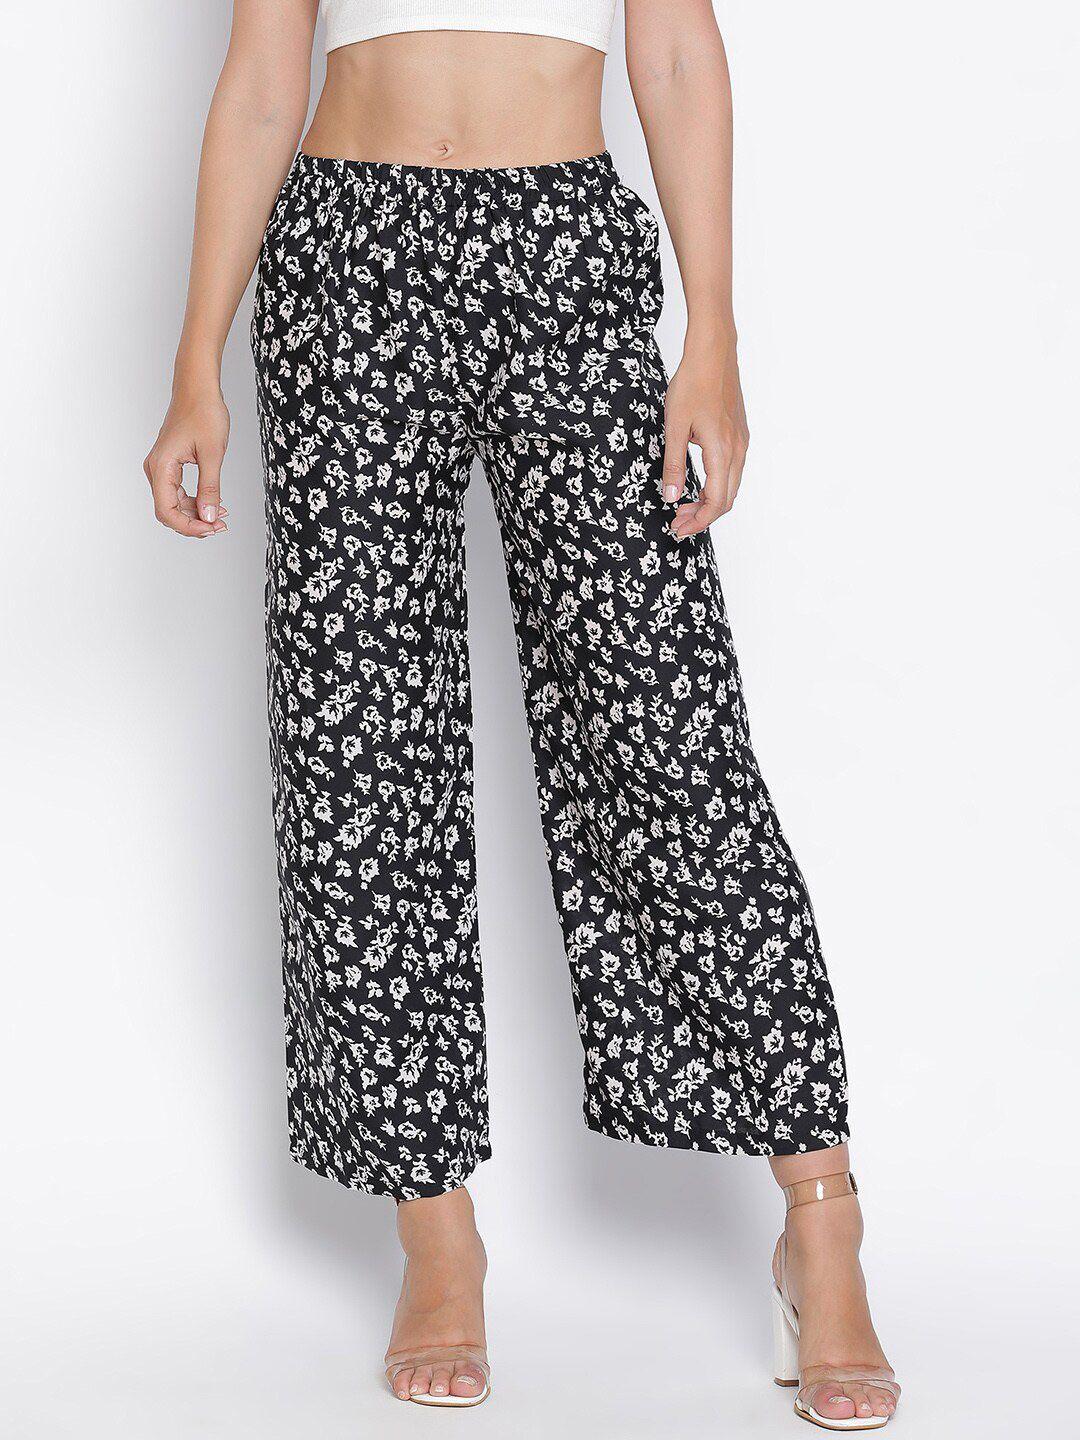 draax fashions women floral printed relaxed flared trousers